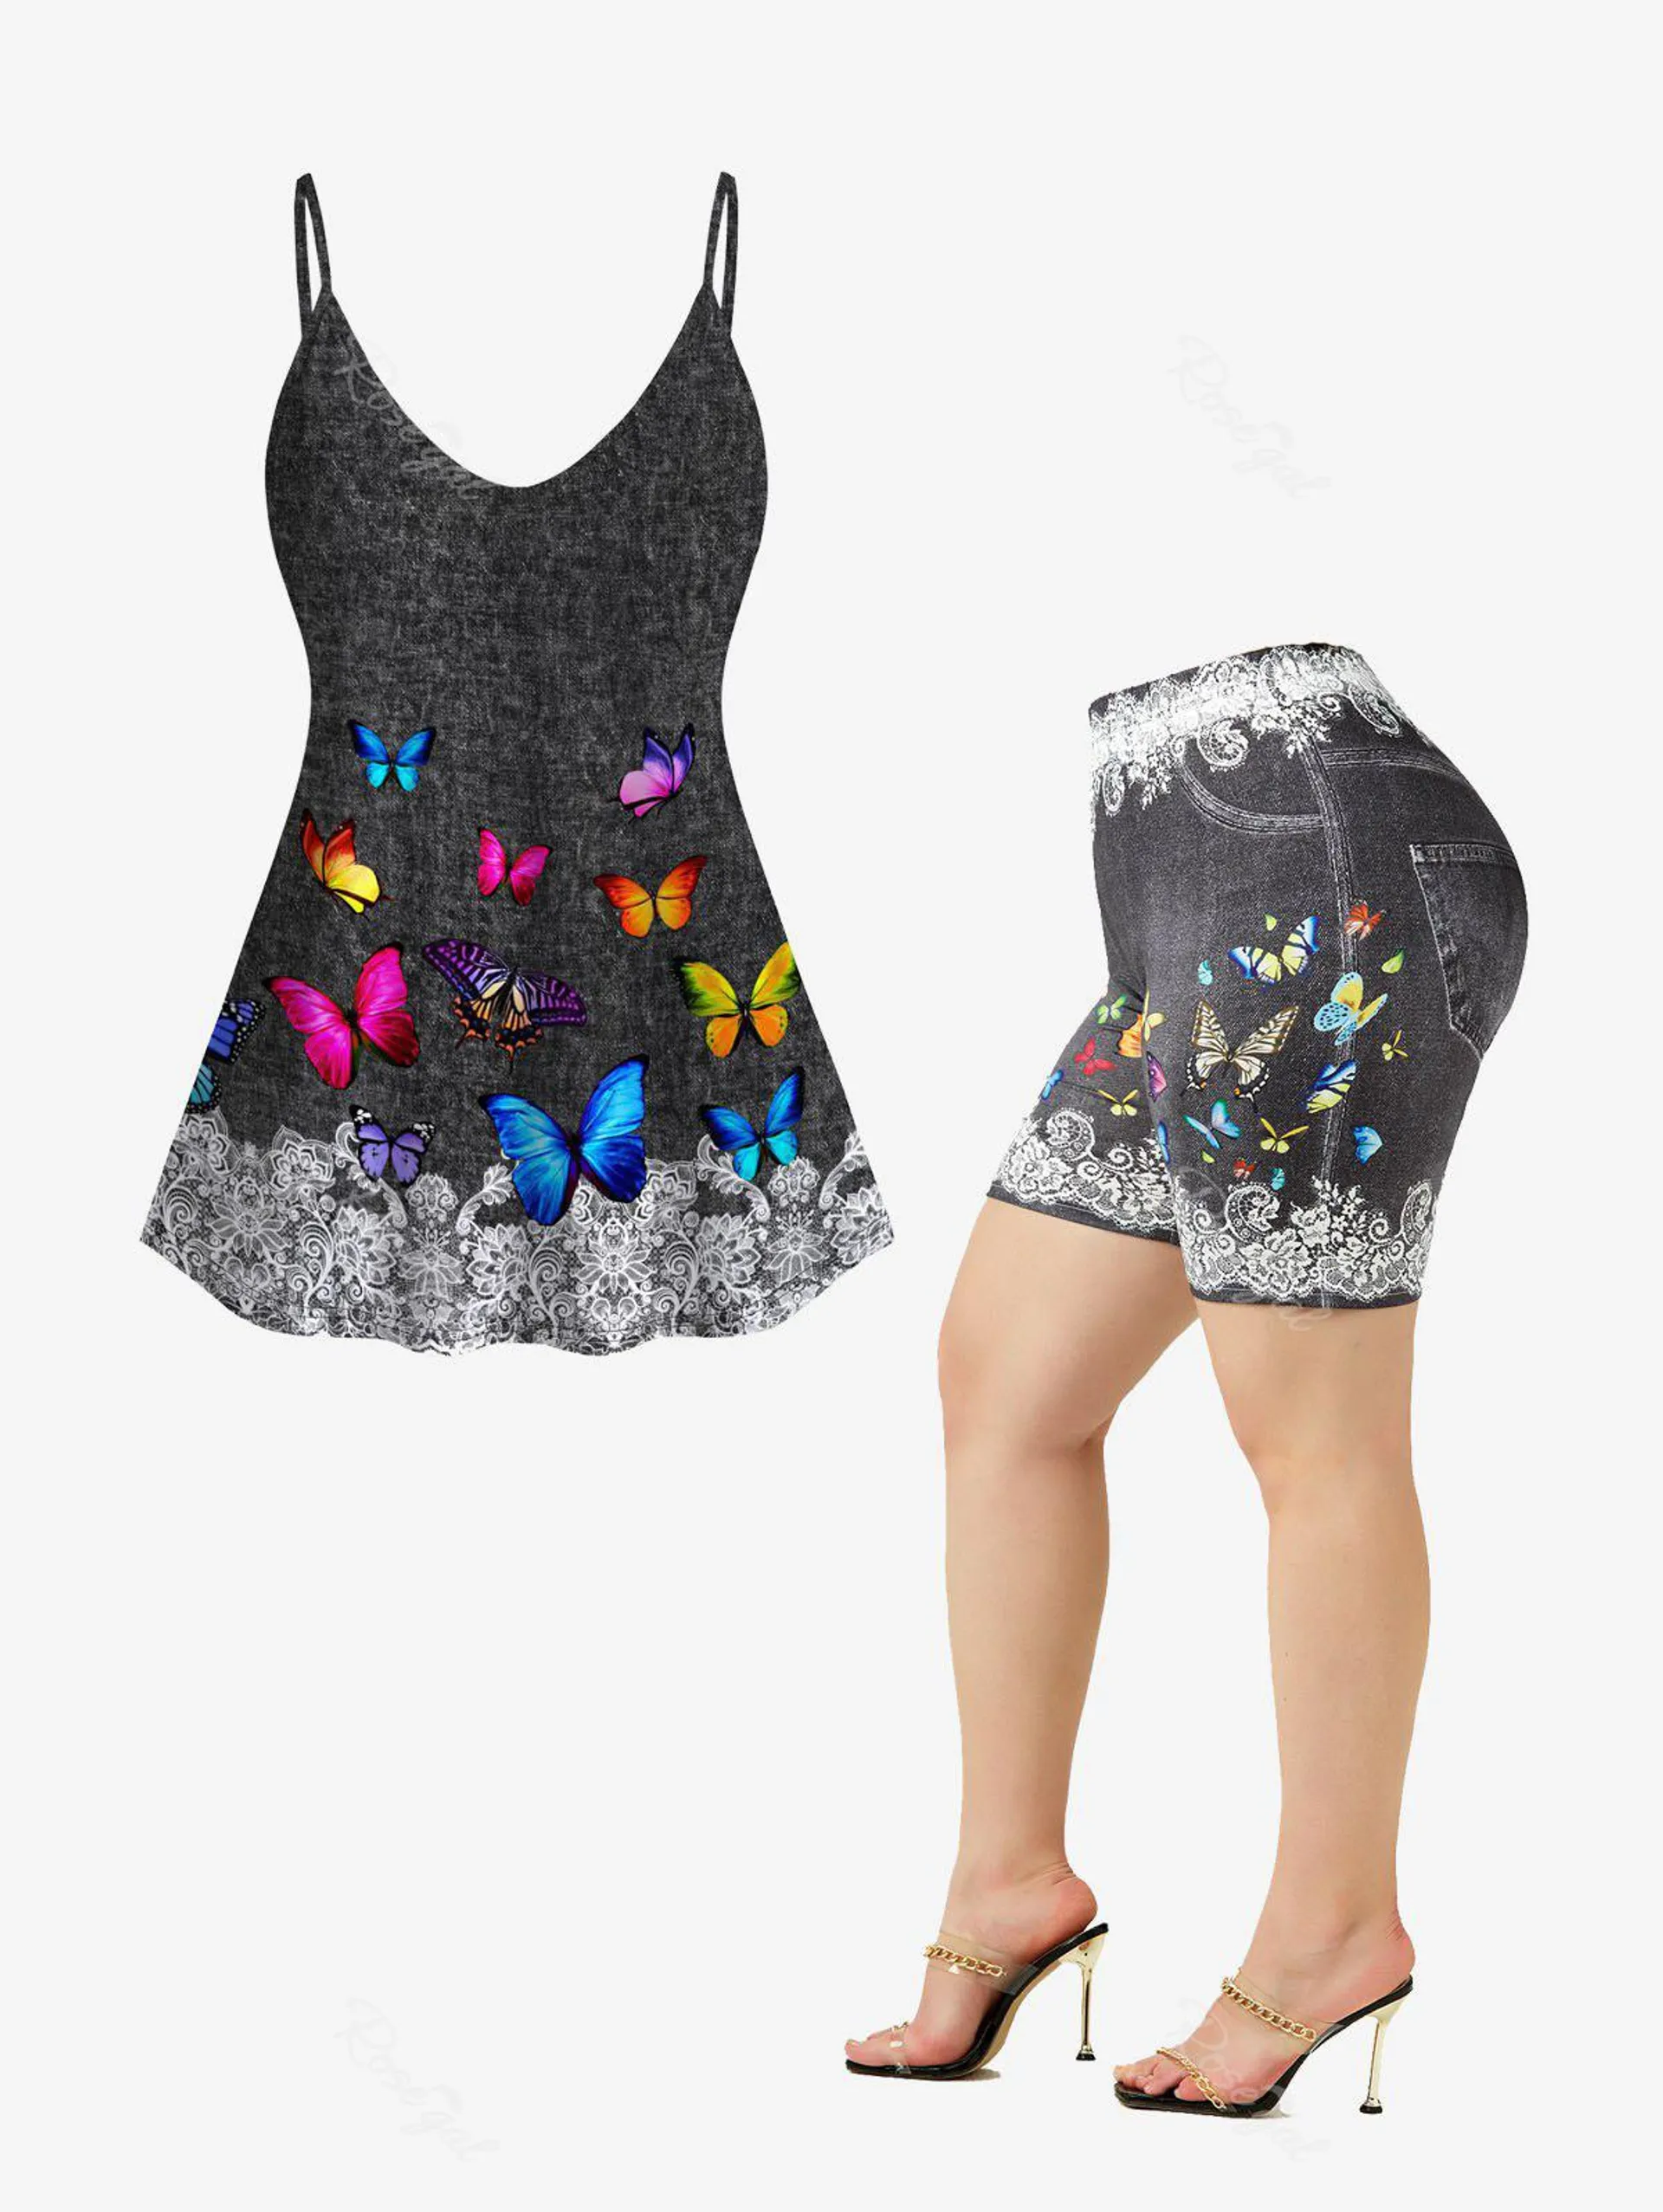 3D Lace Butterfly Print Cami Top and Short Jeggings Plus Size Outfits